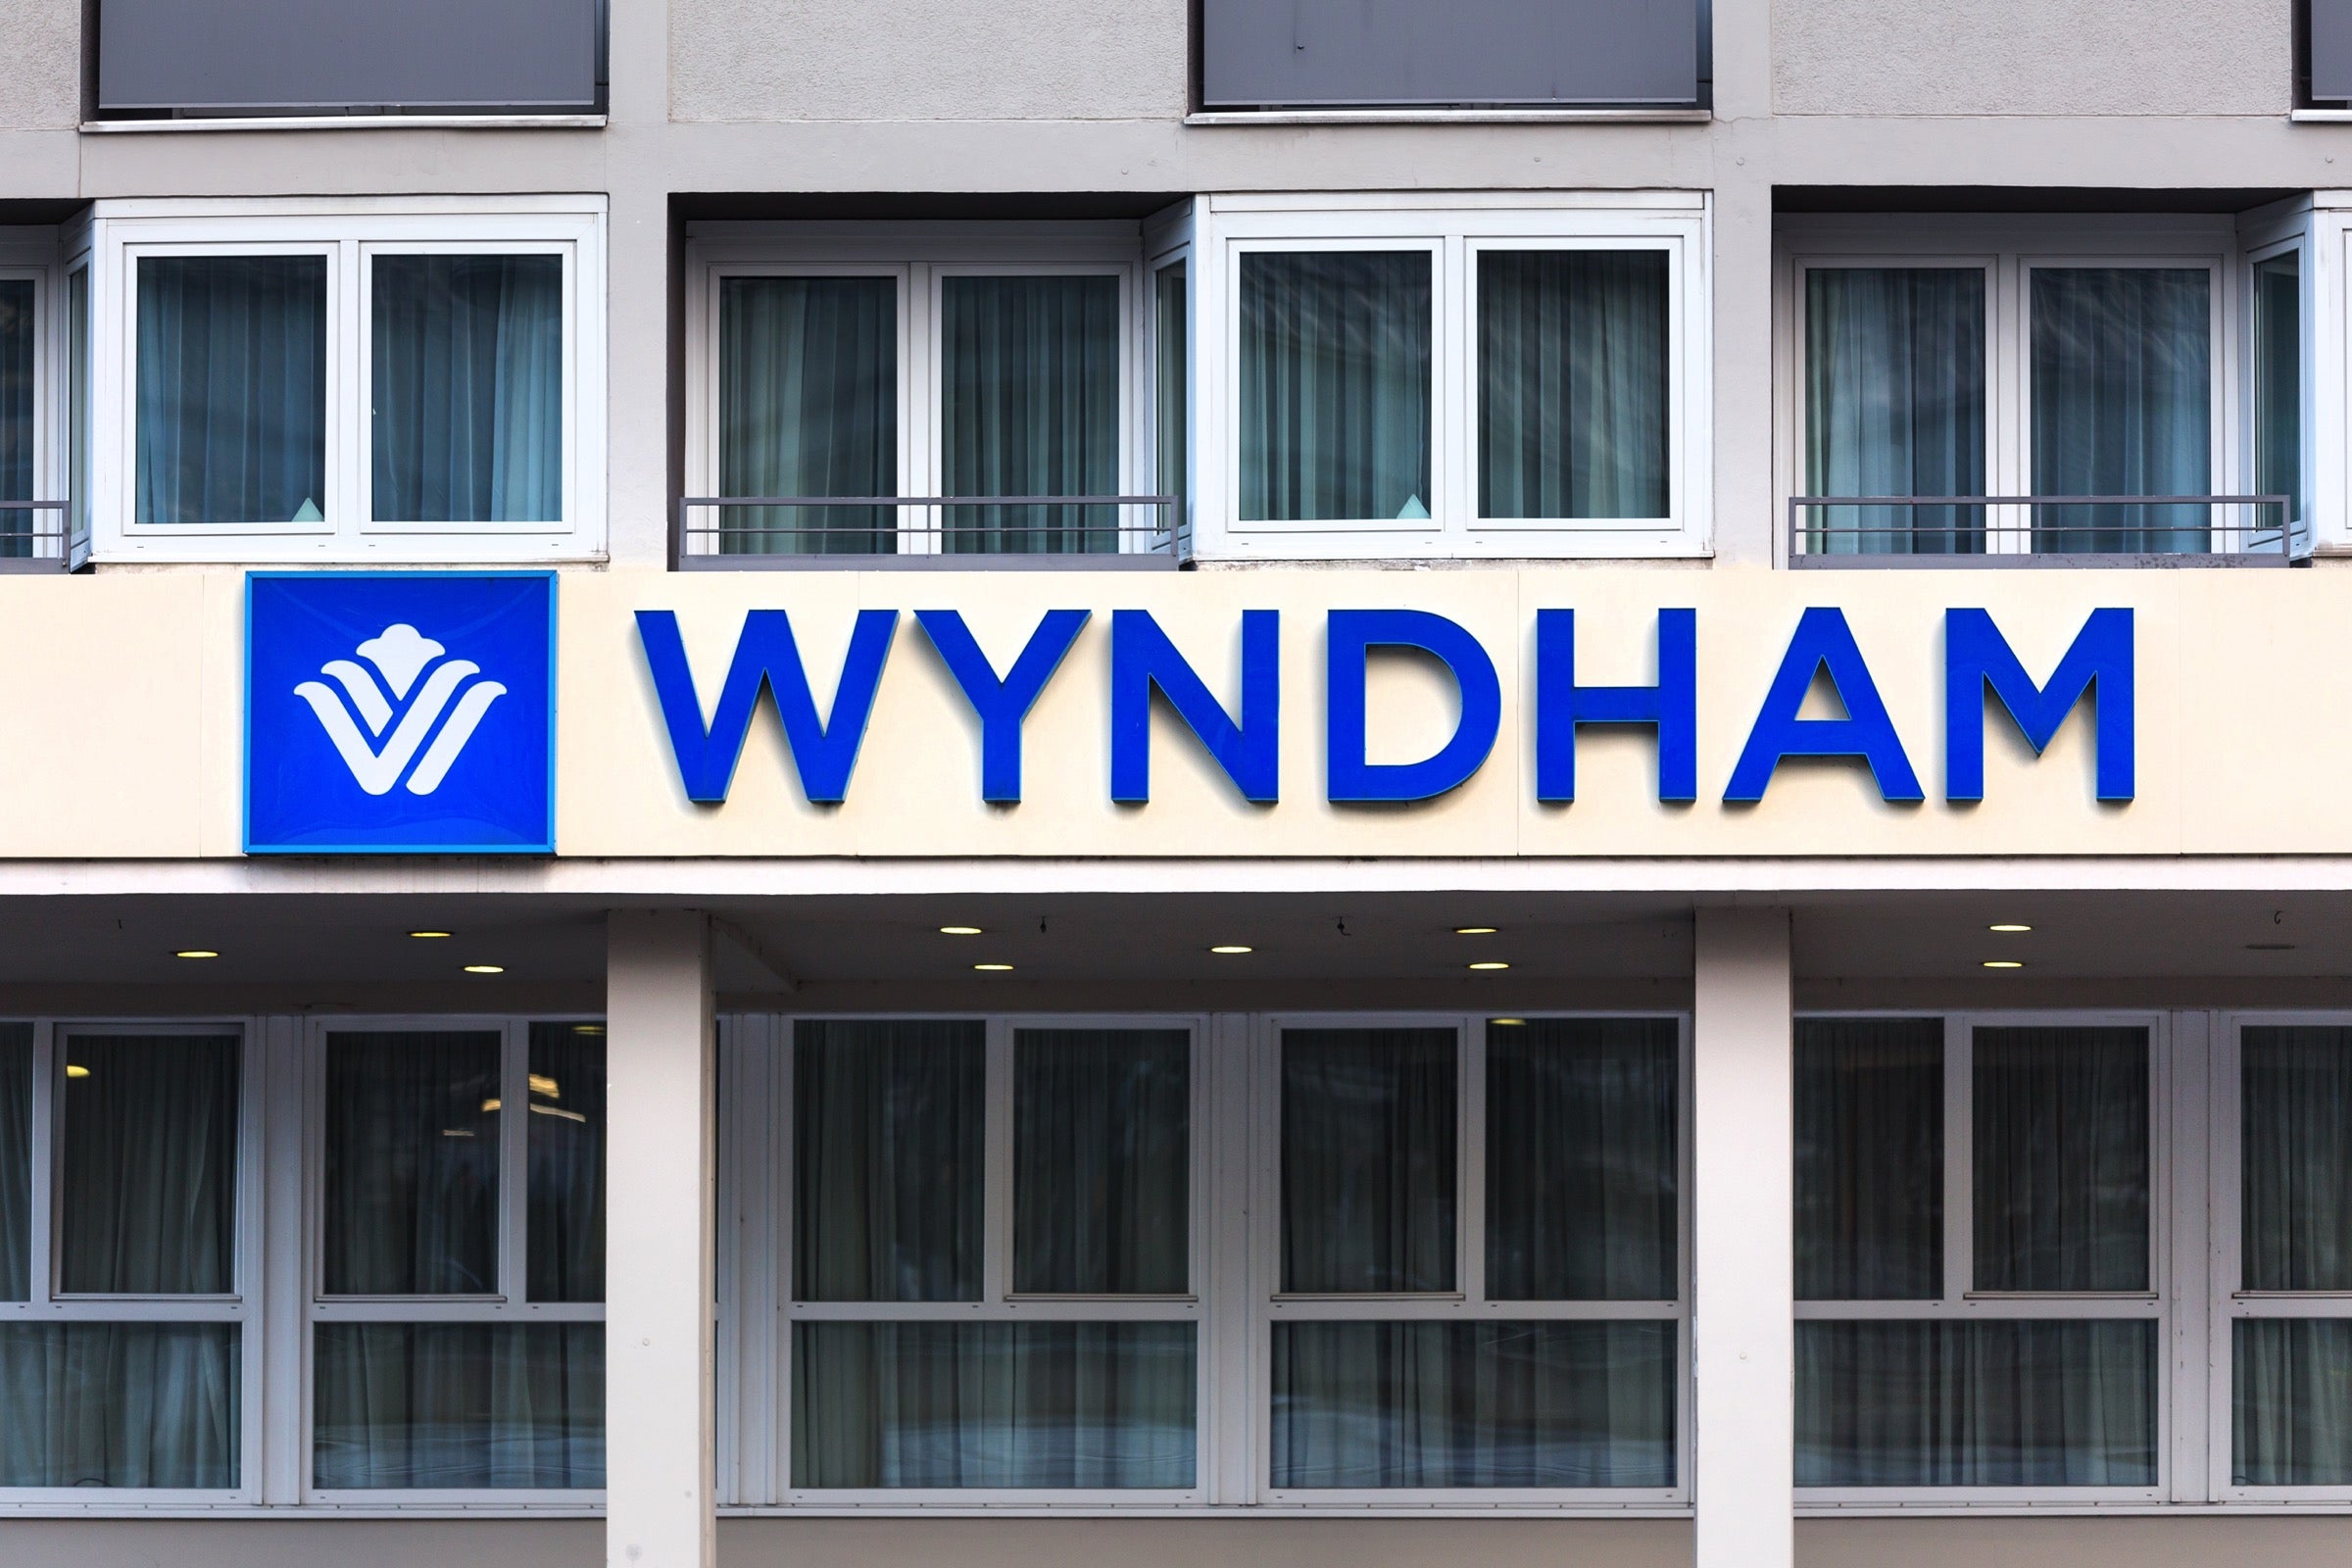 Wyndham sign on a hotel in Cologne Germany